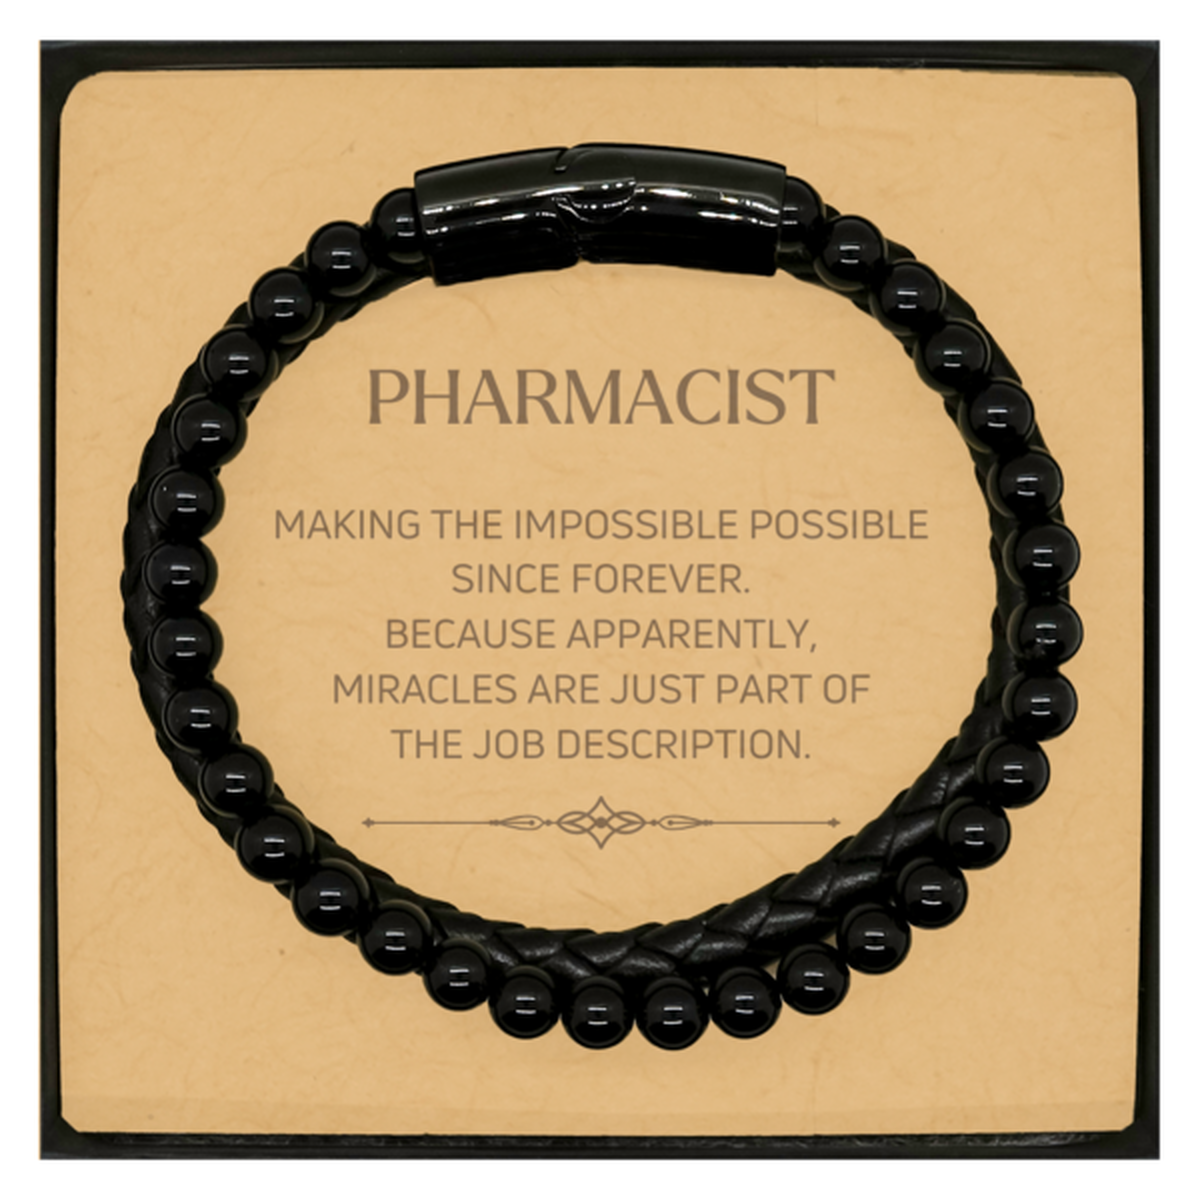 Funny Pharmacist Gifts, Miracles are just part of the job description, Inspirational Birthday Christmas Stone Leather Bracelets For Pharmacist, Men, Women, Coworkers, Friends, Boss